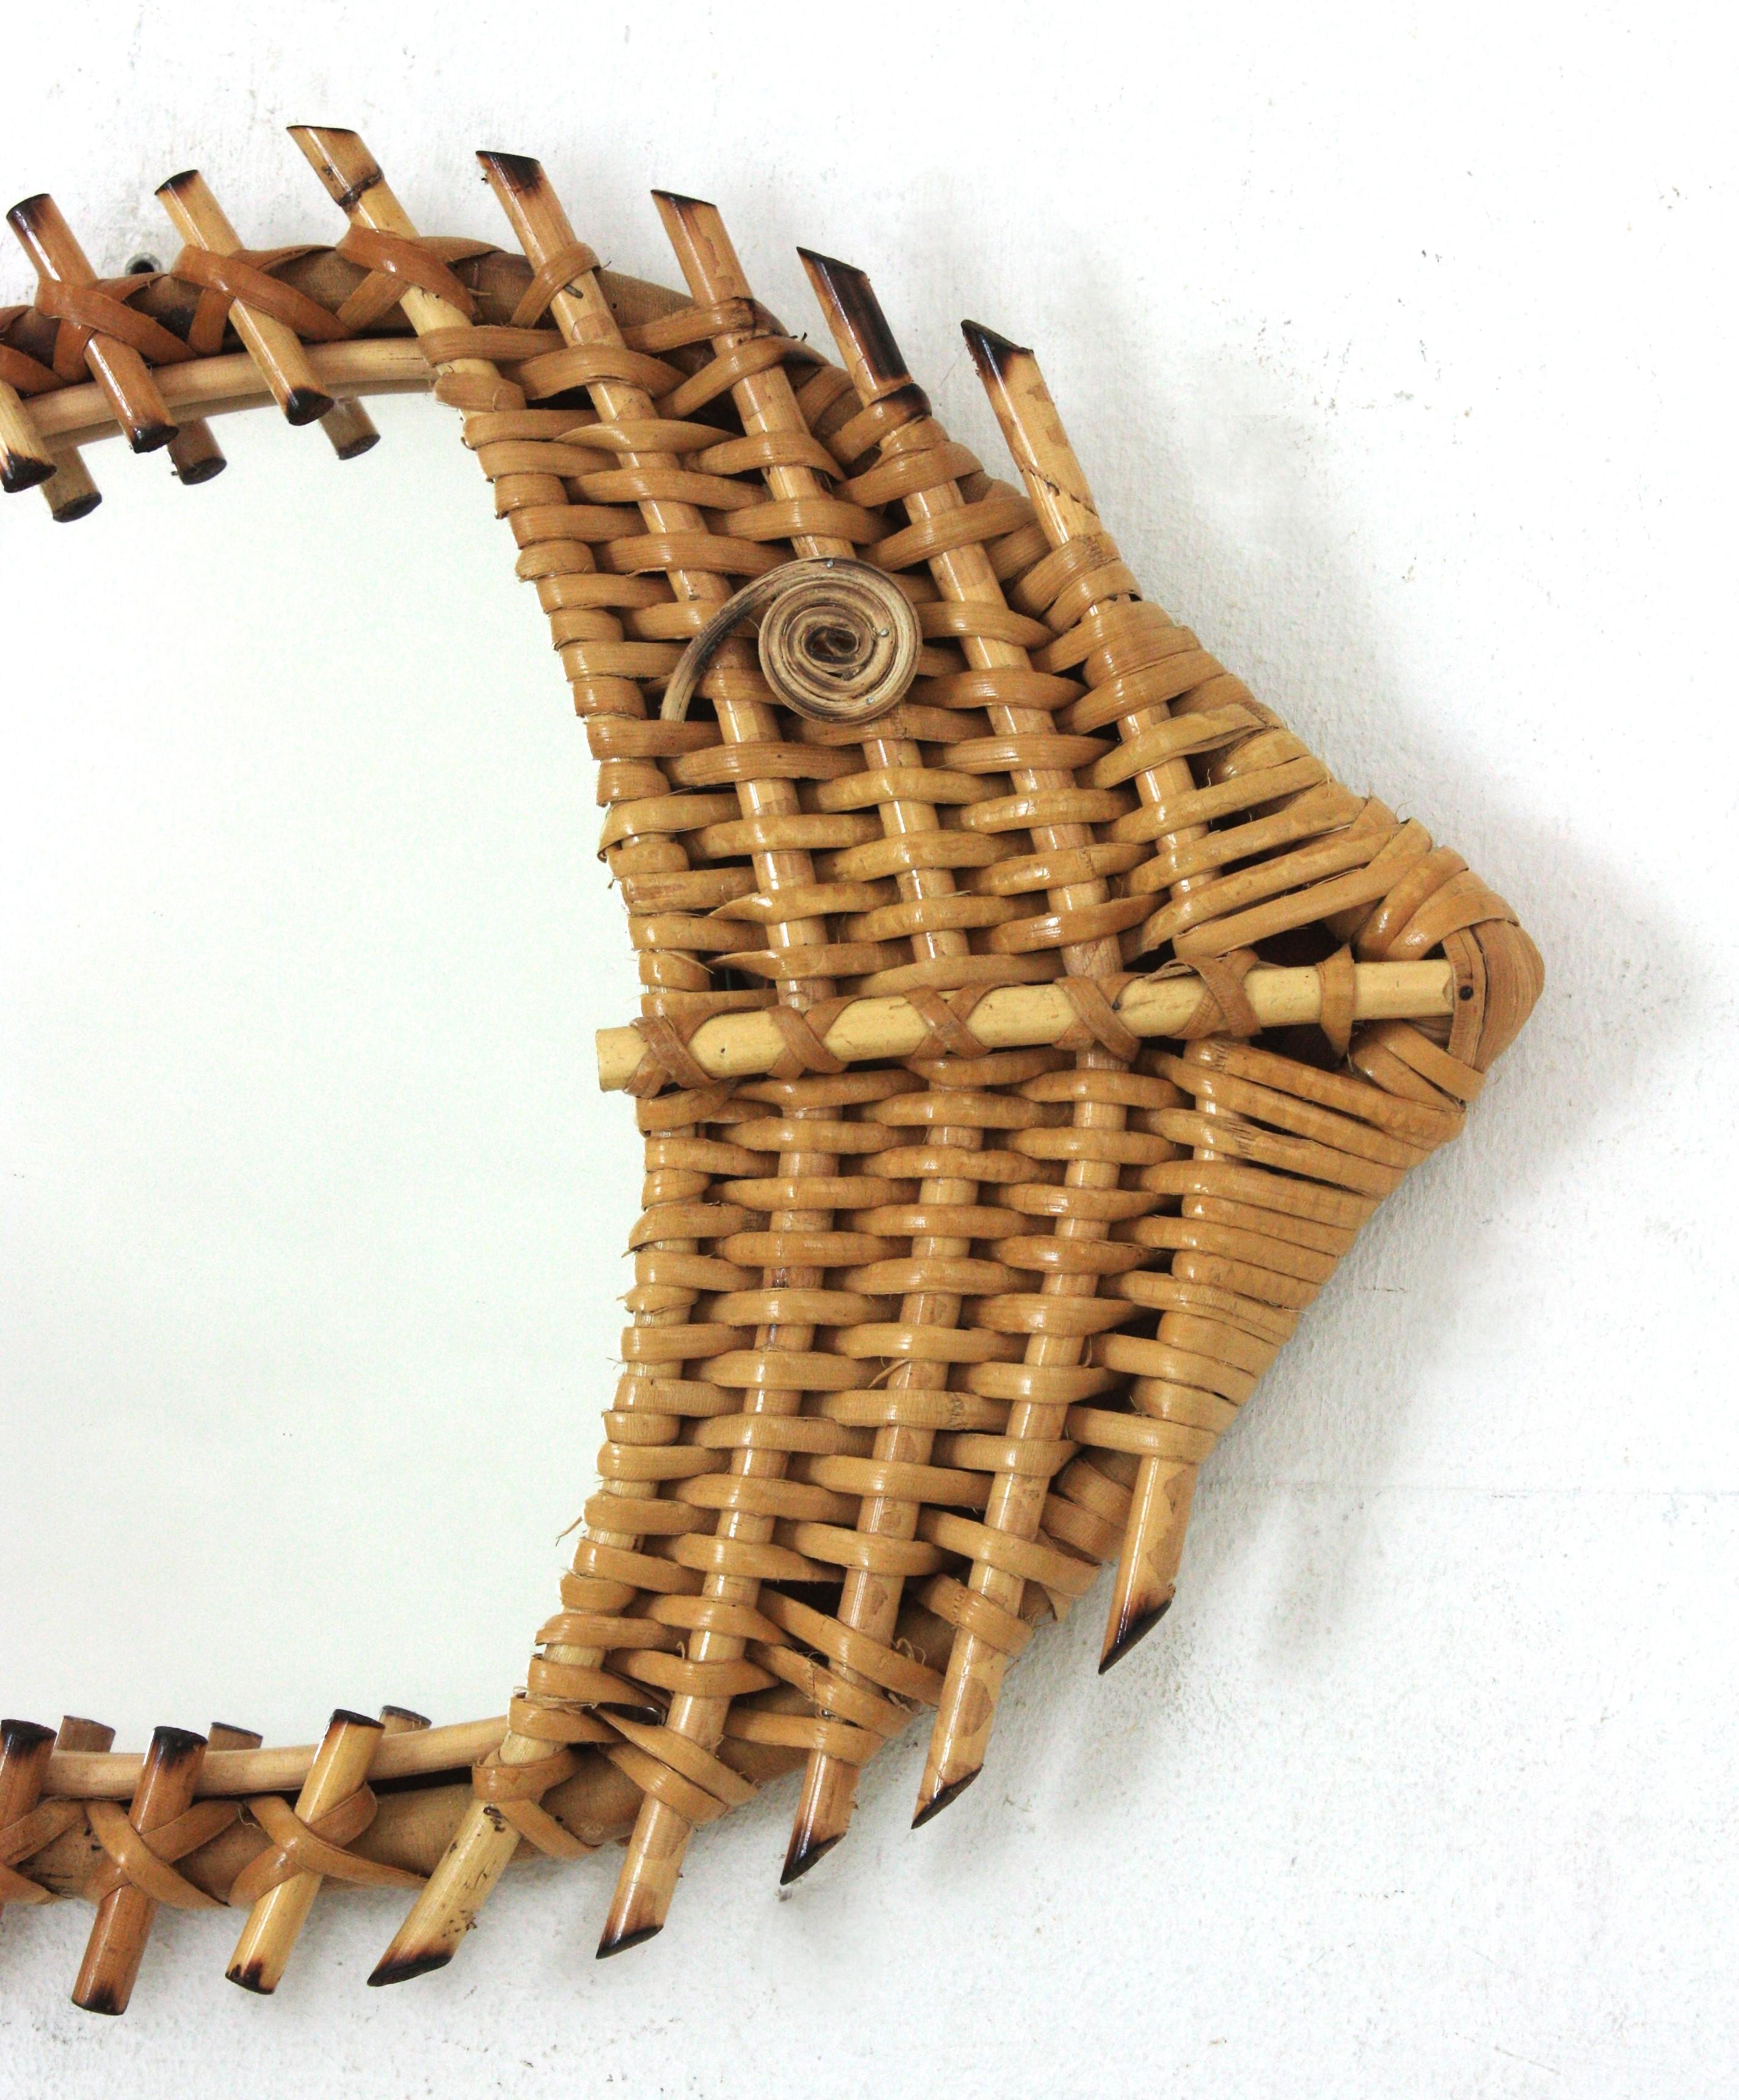 Fish Figure Rattan and Woven Wicker Wall Mirror, France, 1950s-1960s.
Rare find.
Eye-catching fish shaped wall mirror. Hand-crafted in rattan with hand-woven wicker work on the body.
This spectacular mirror has a design combining the Midcentury